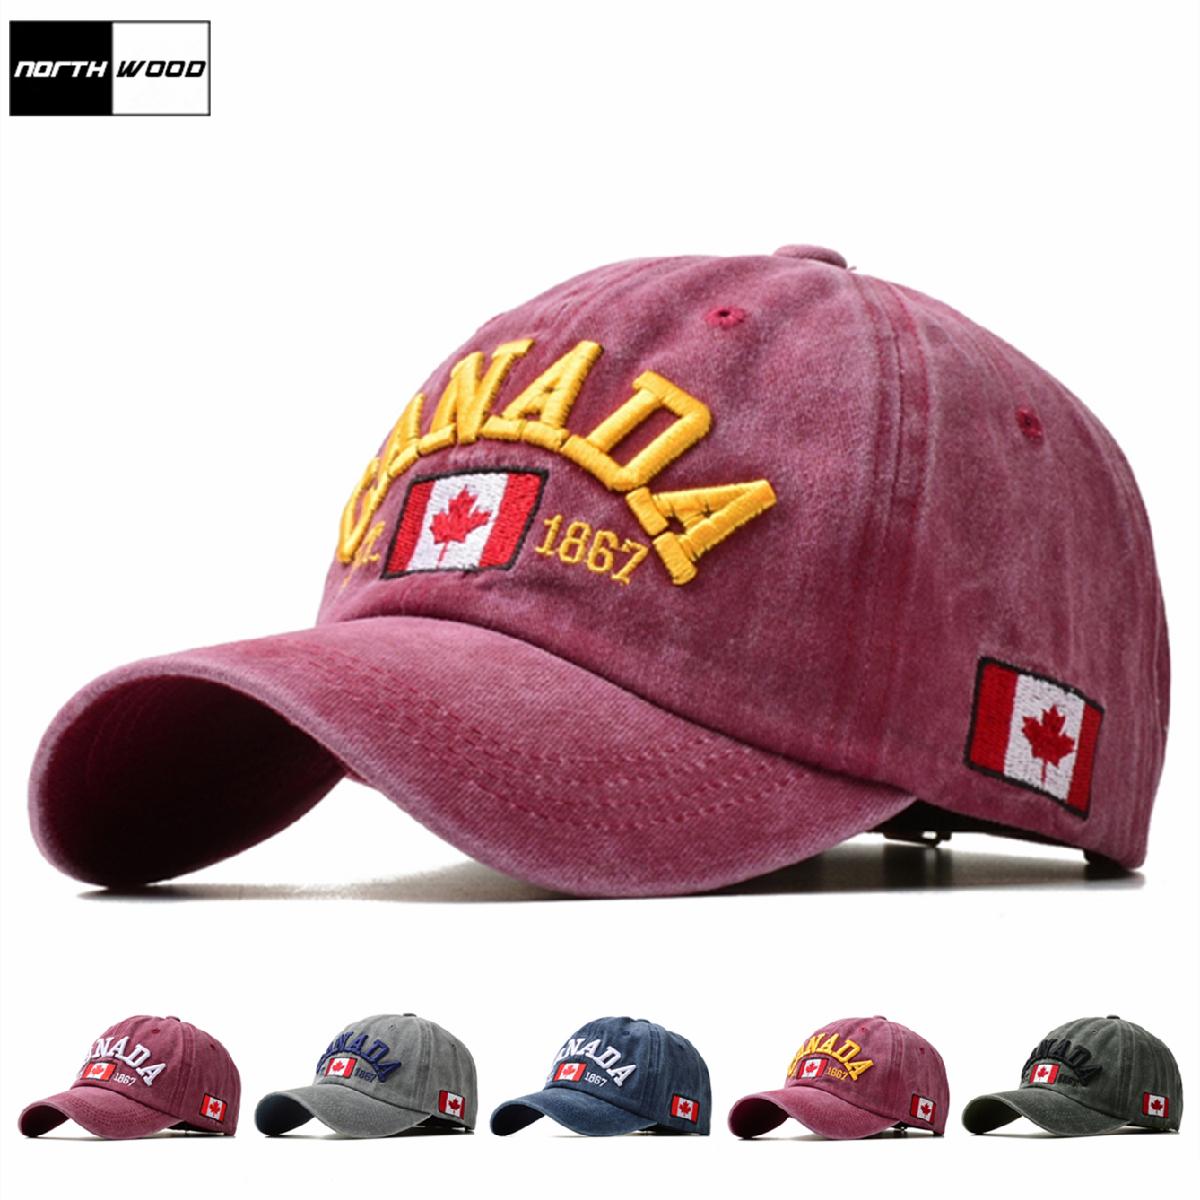 Northwood 5 Colors CANADA Embroidery Cotton Baseball Caps for Men Women Dad Hats Outdoor Trucker Hats